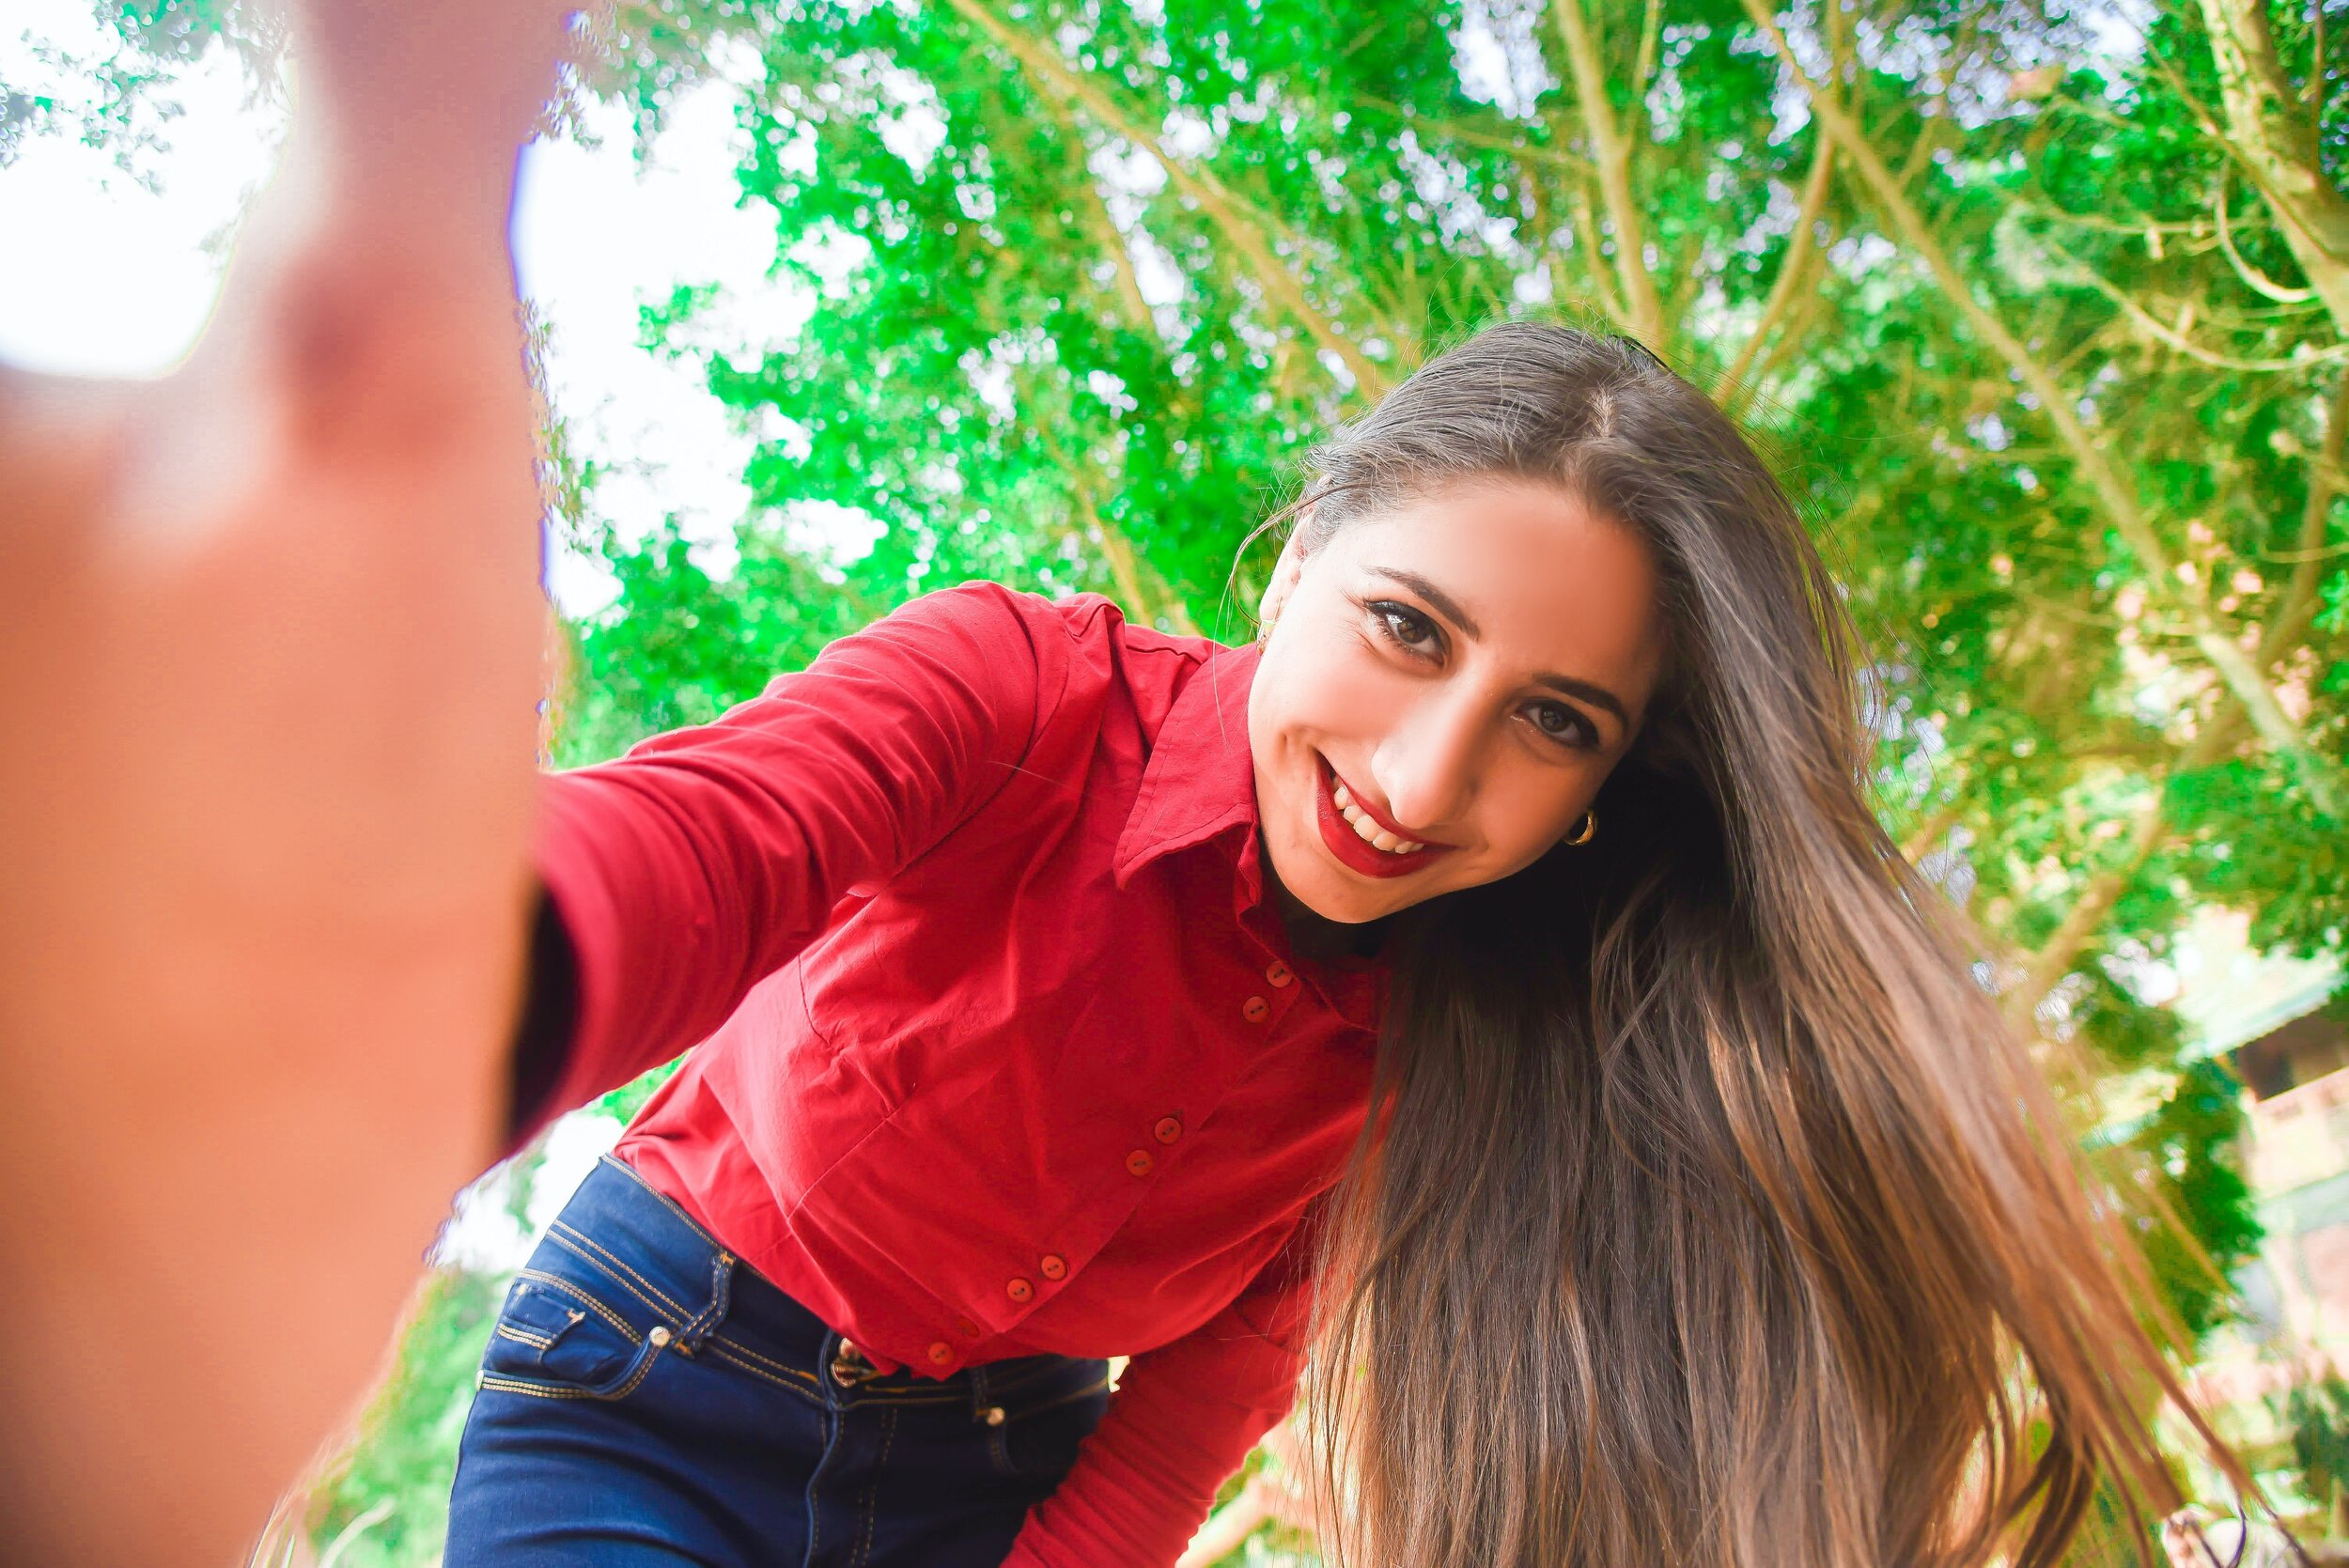 smiling-woman-in-red-shirt-and-blue-jeans-taking-selfie-674685.jpg